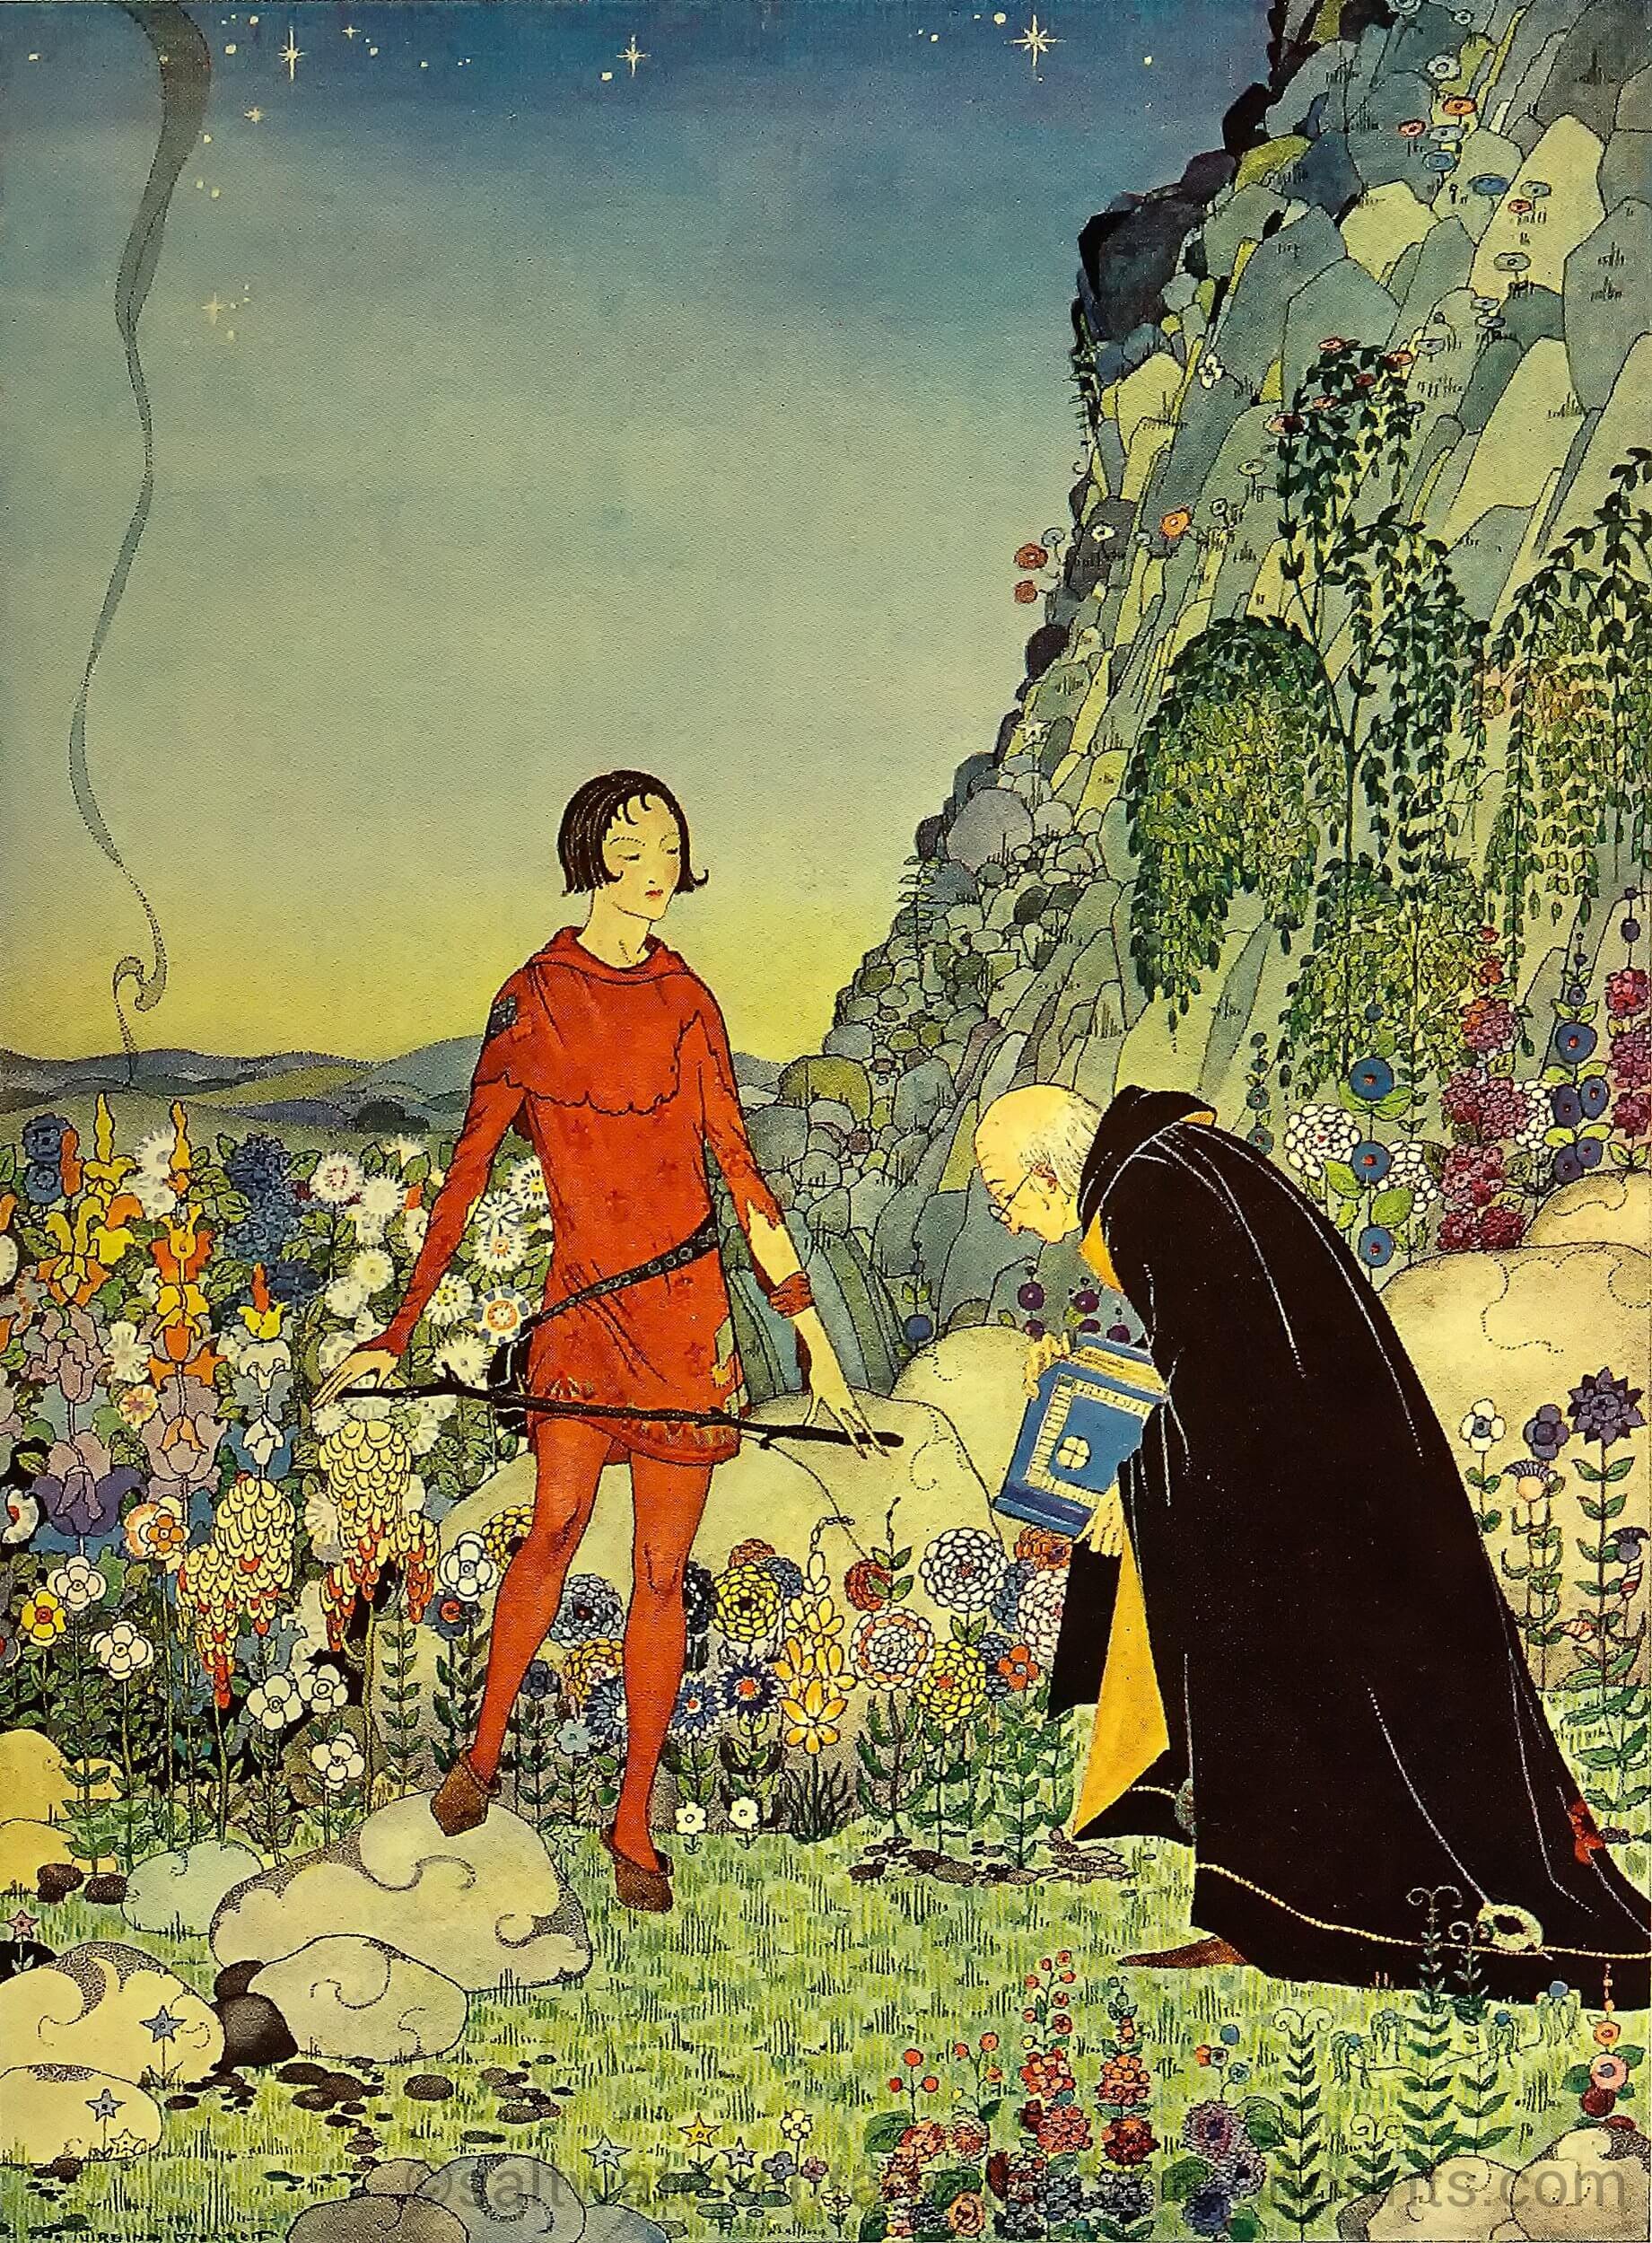 The Second Day of the Festival, Virginia Frances Sterrett, 1920.